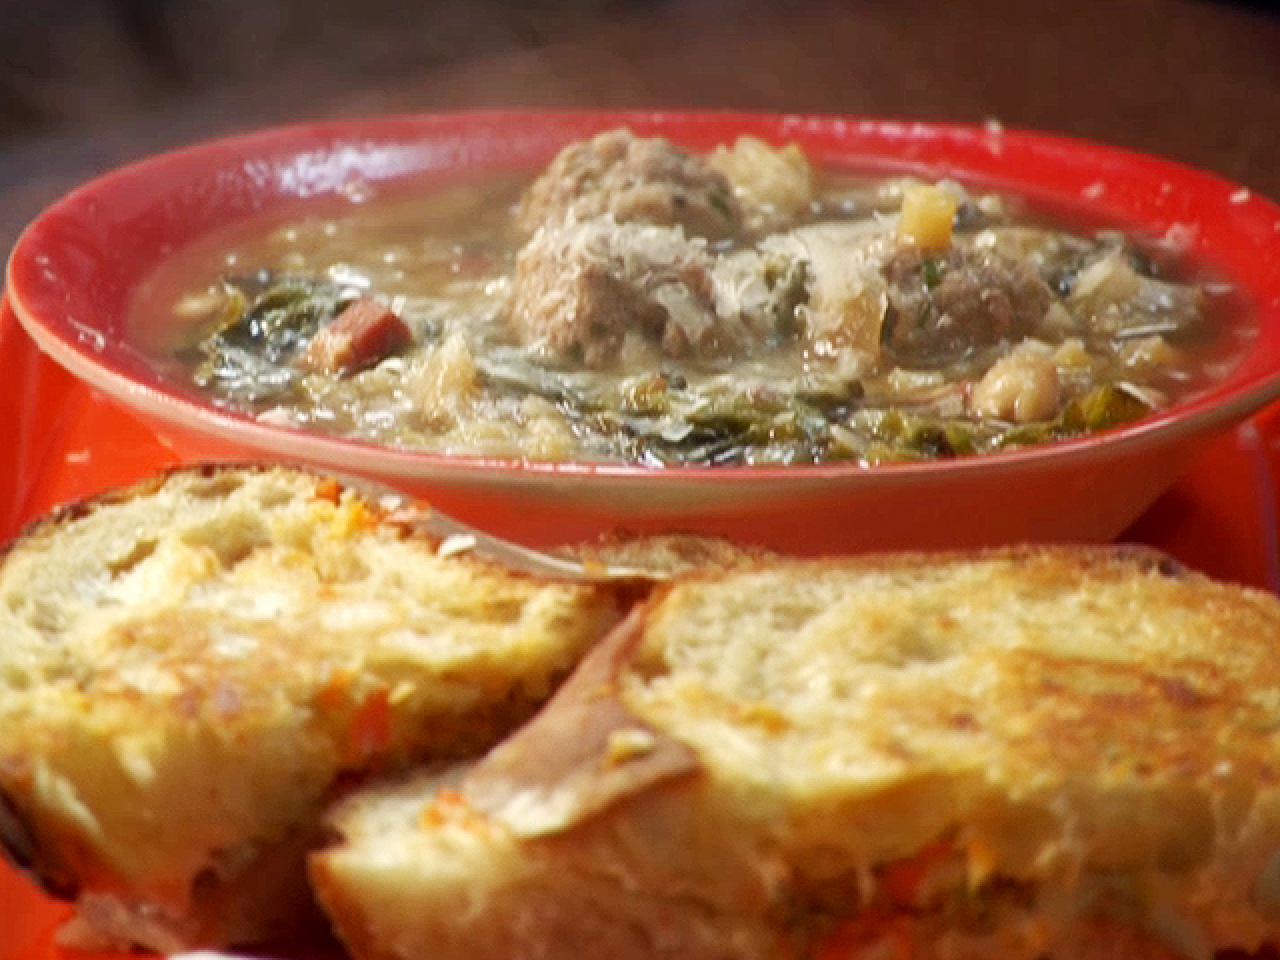 Meatball Gumbo Soup - Recipe from Farm Rich